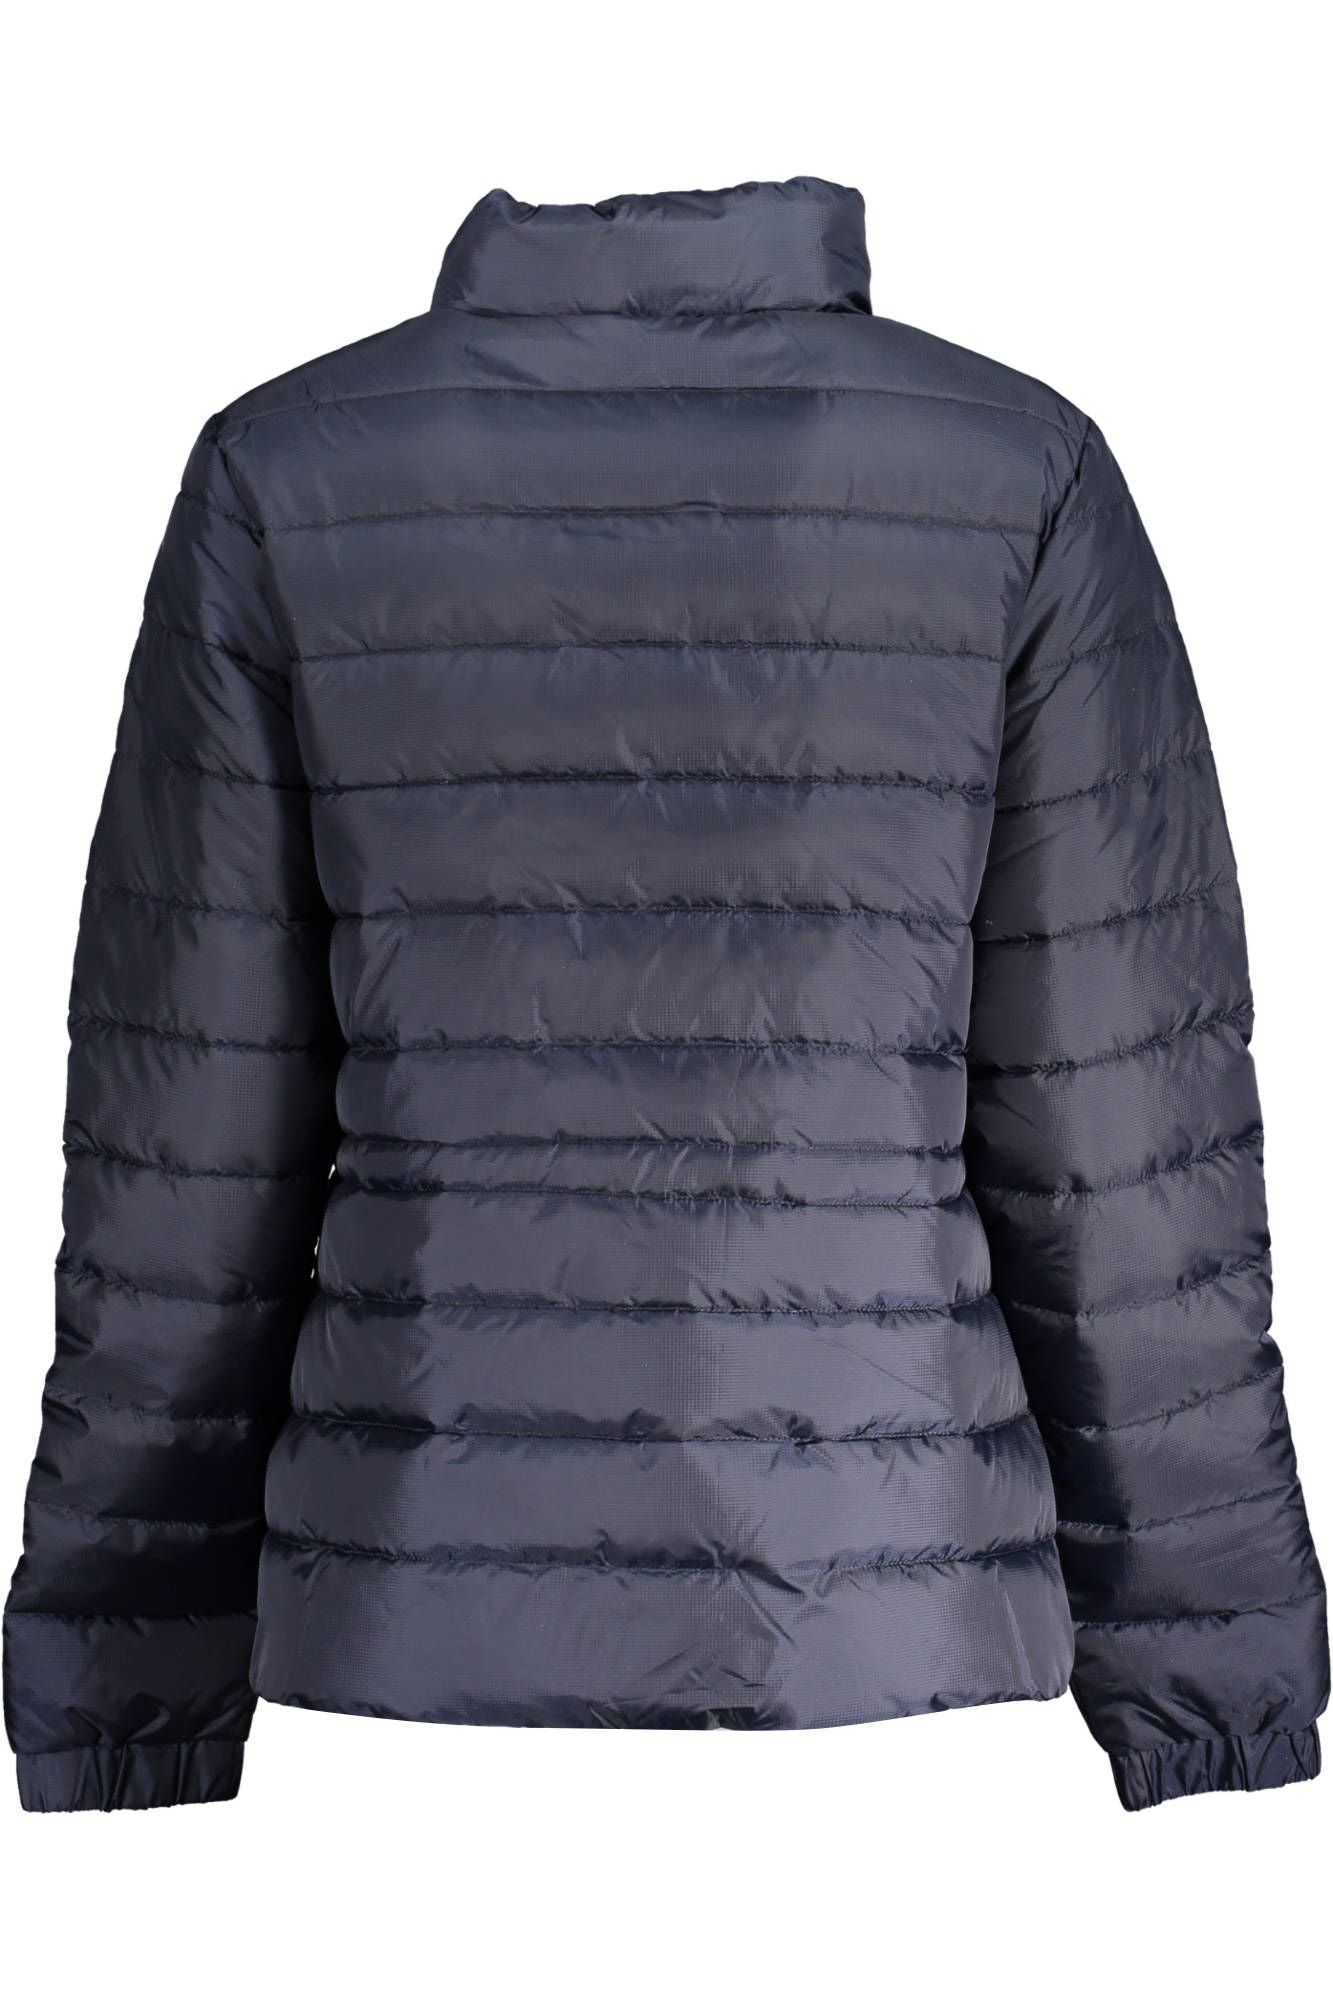 Chic Water-Resistant Blue Jacket with Eco-Conscious Appeal